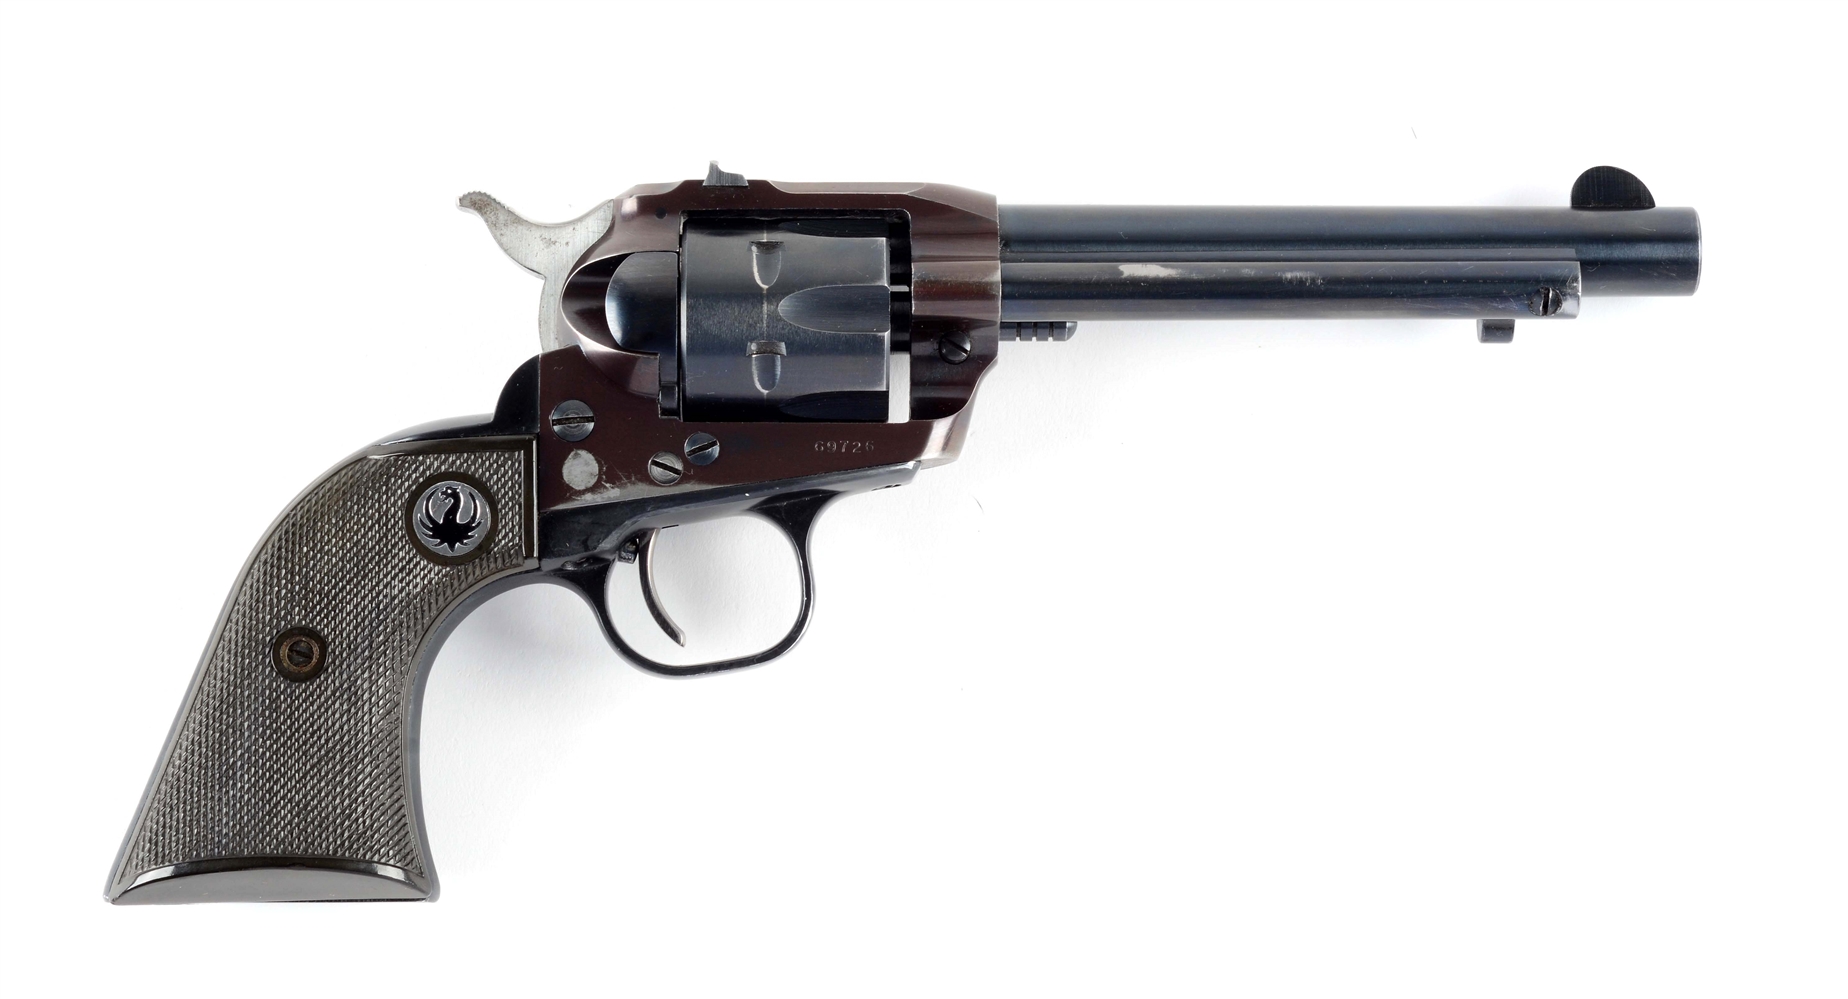 (M) RUGER SINGLE SIX REVOLVER.